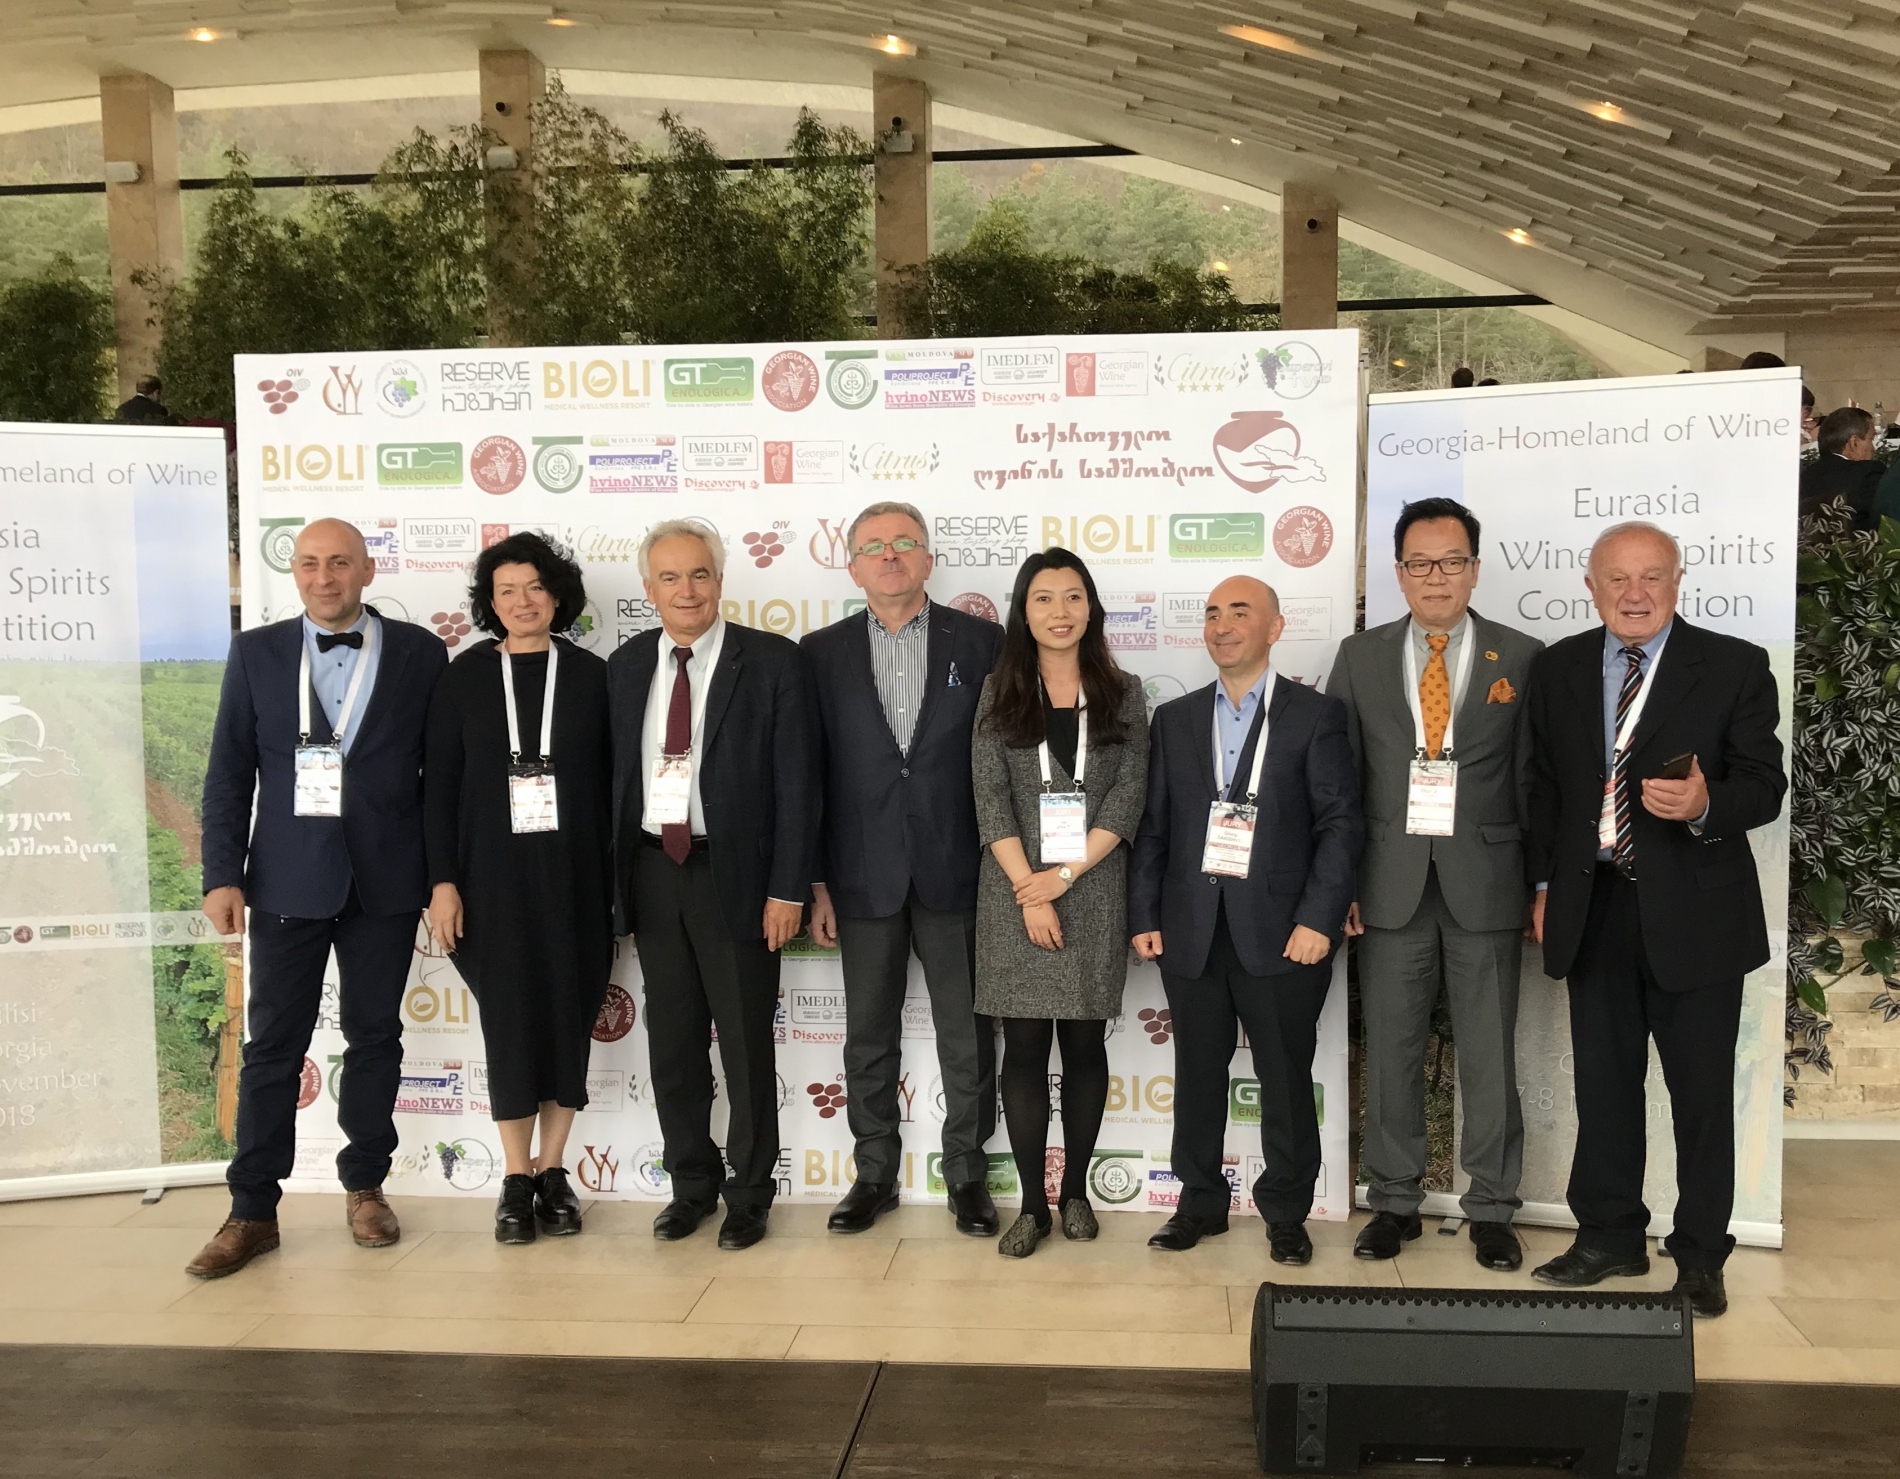 The first Eurasia Wine and Spirits Competition in Georgia